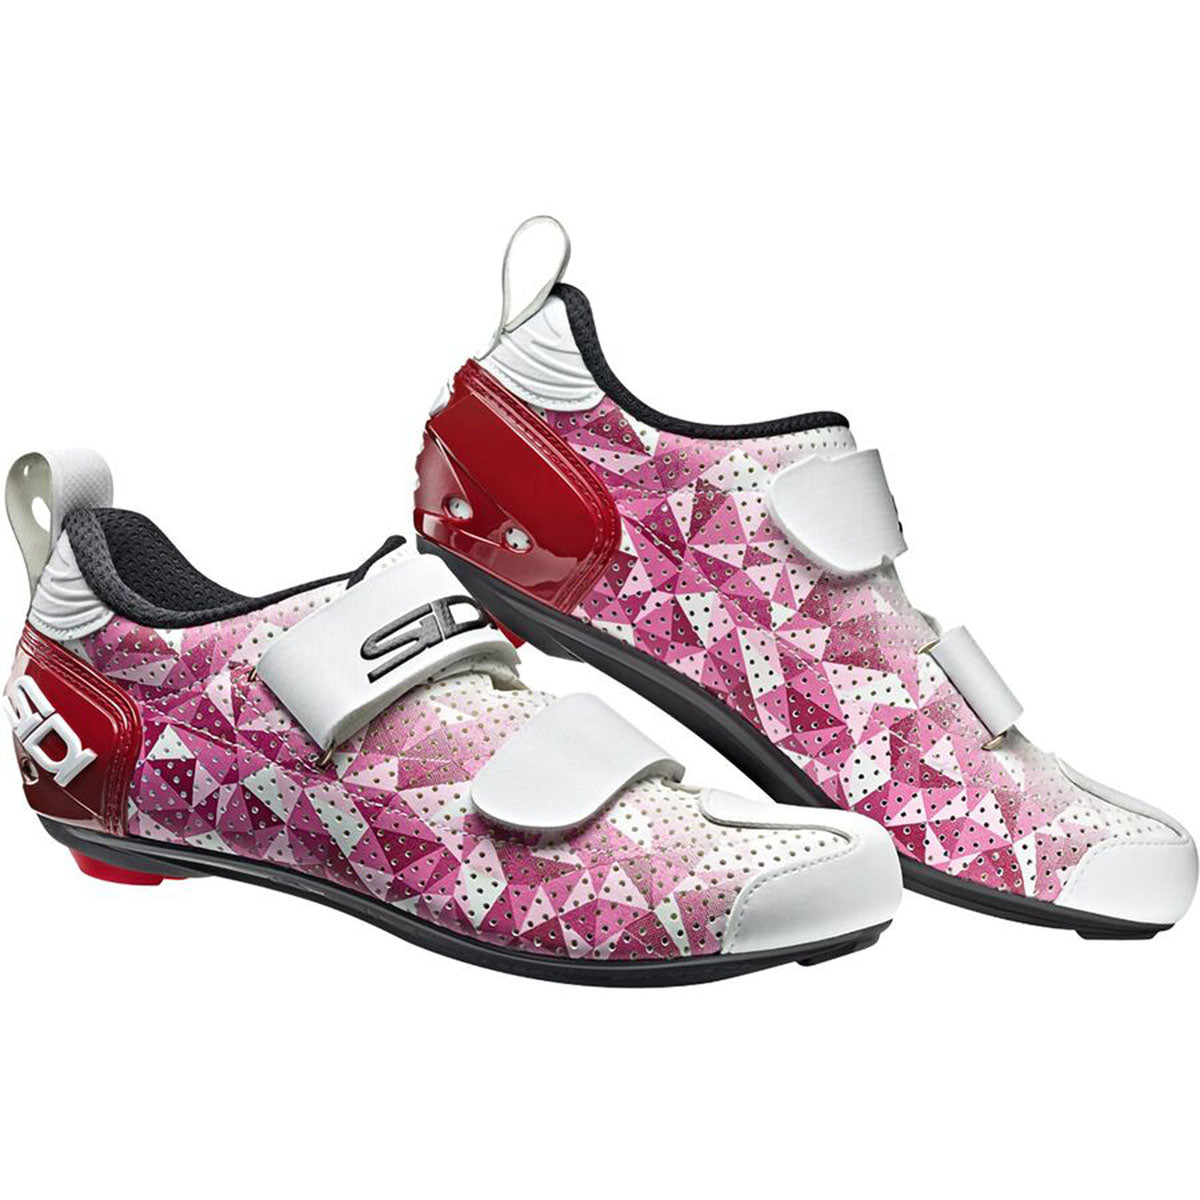 Sidi Womens T-5 Air Triathlon Bicycle Shoes - Rose/Red/White